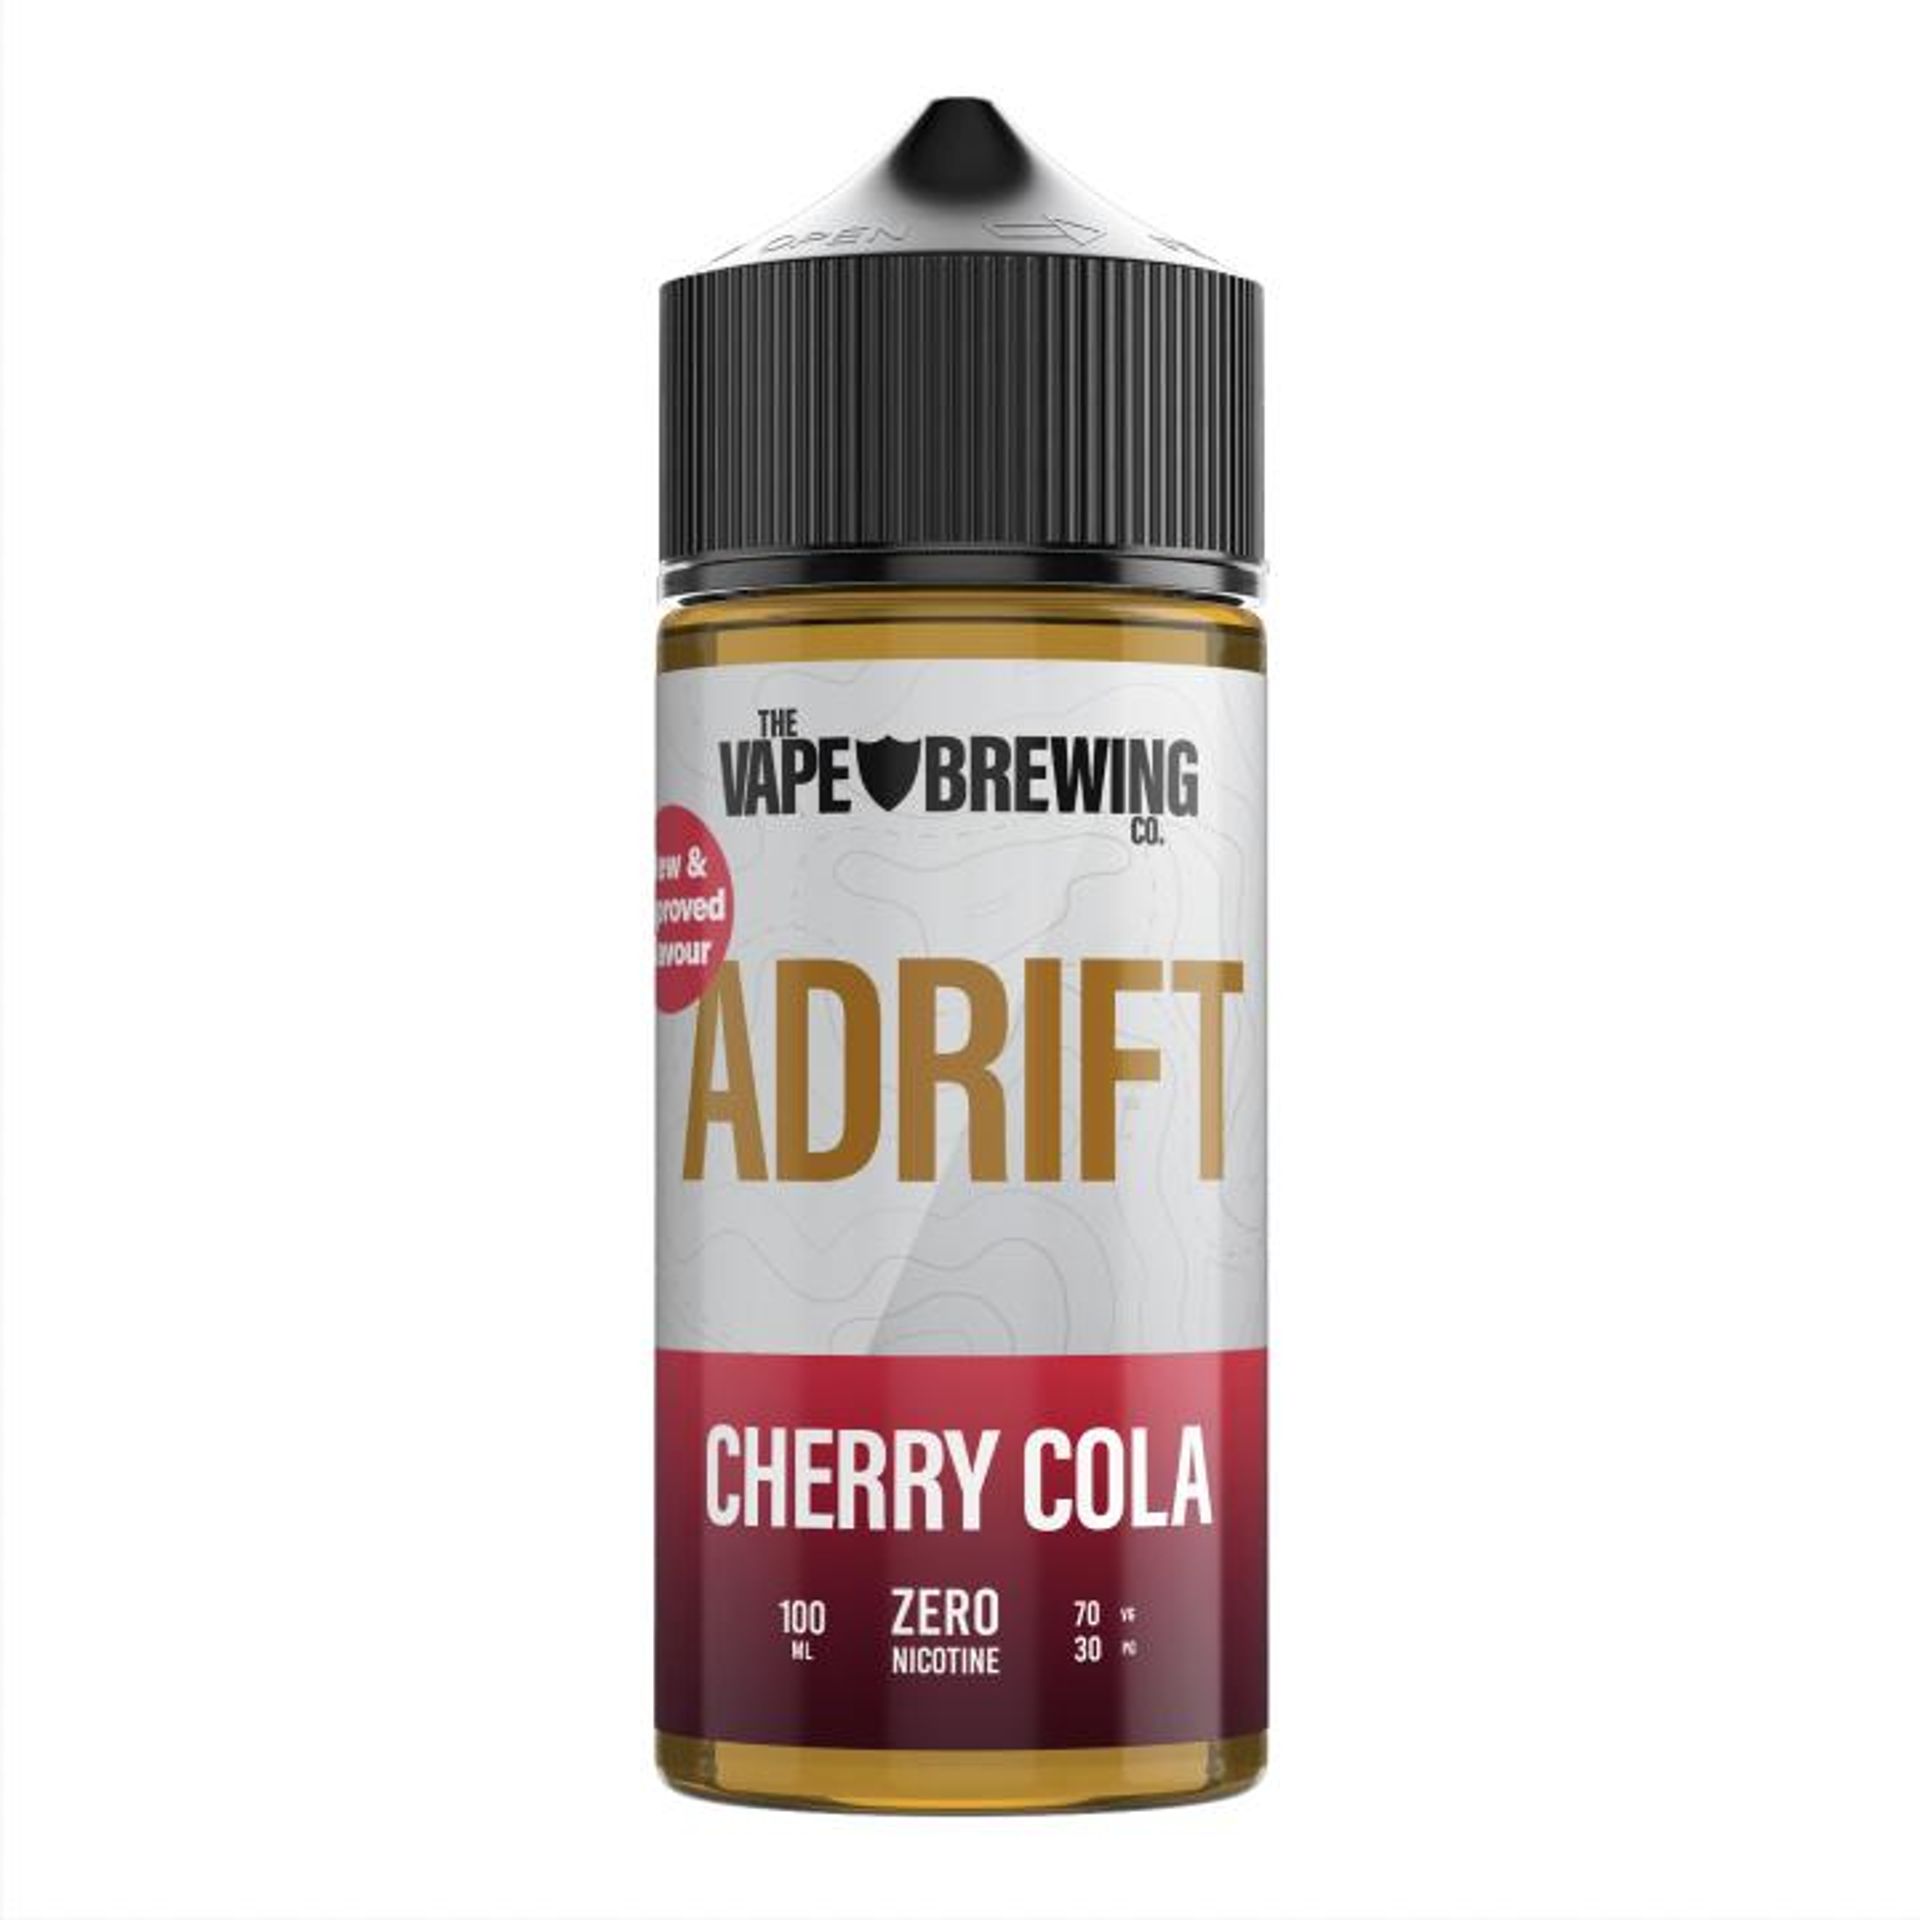 Image of Cherry Cola by The Vape Brewing Co